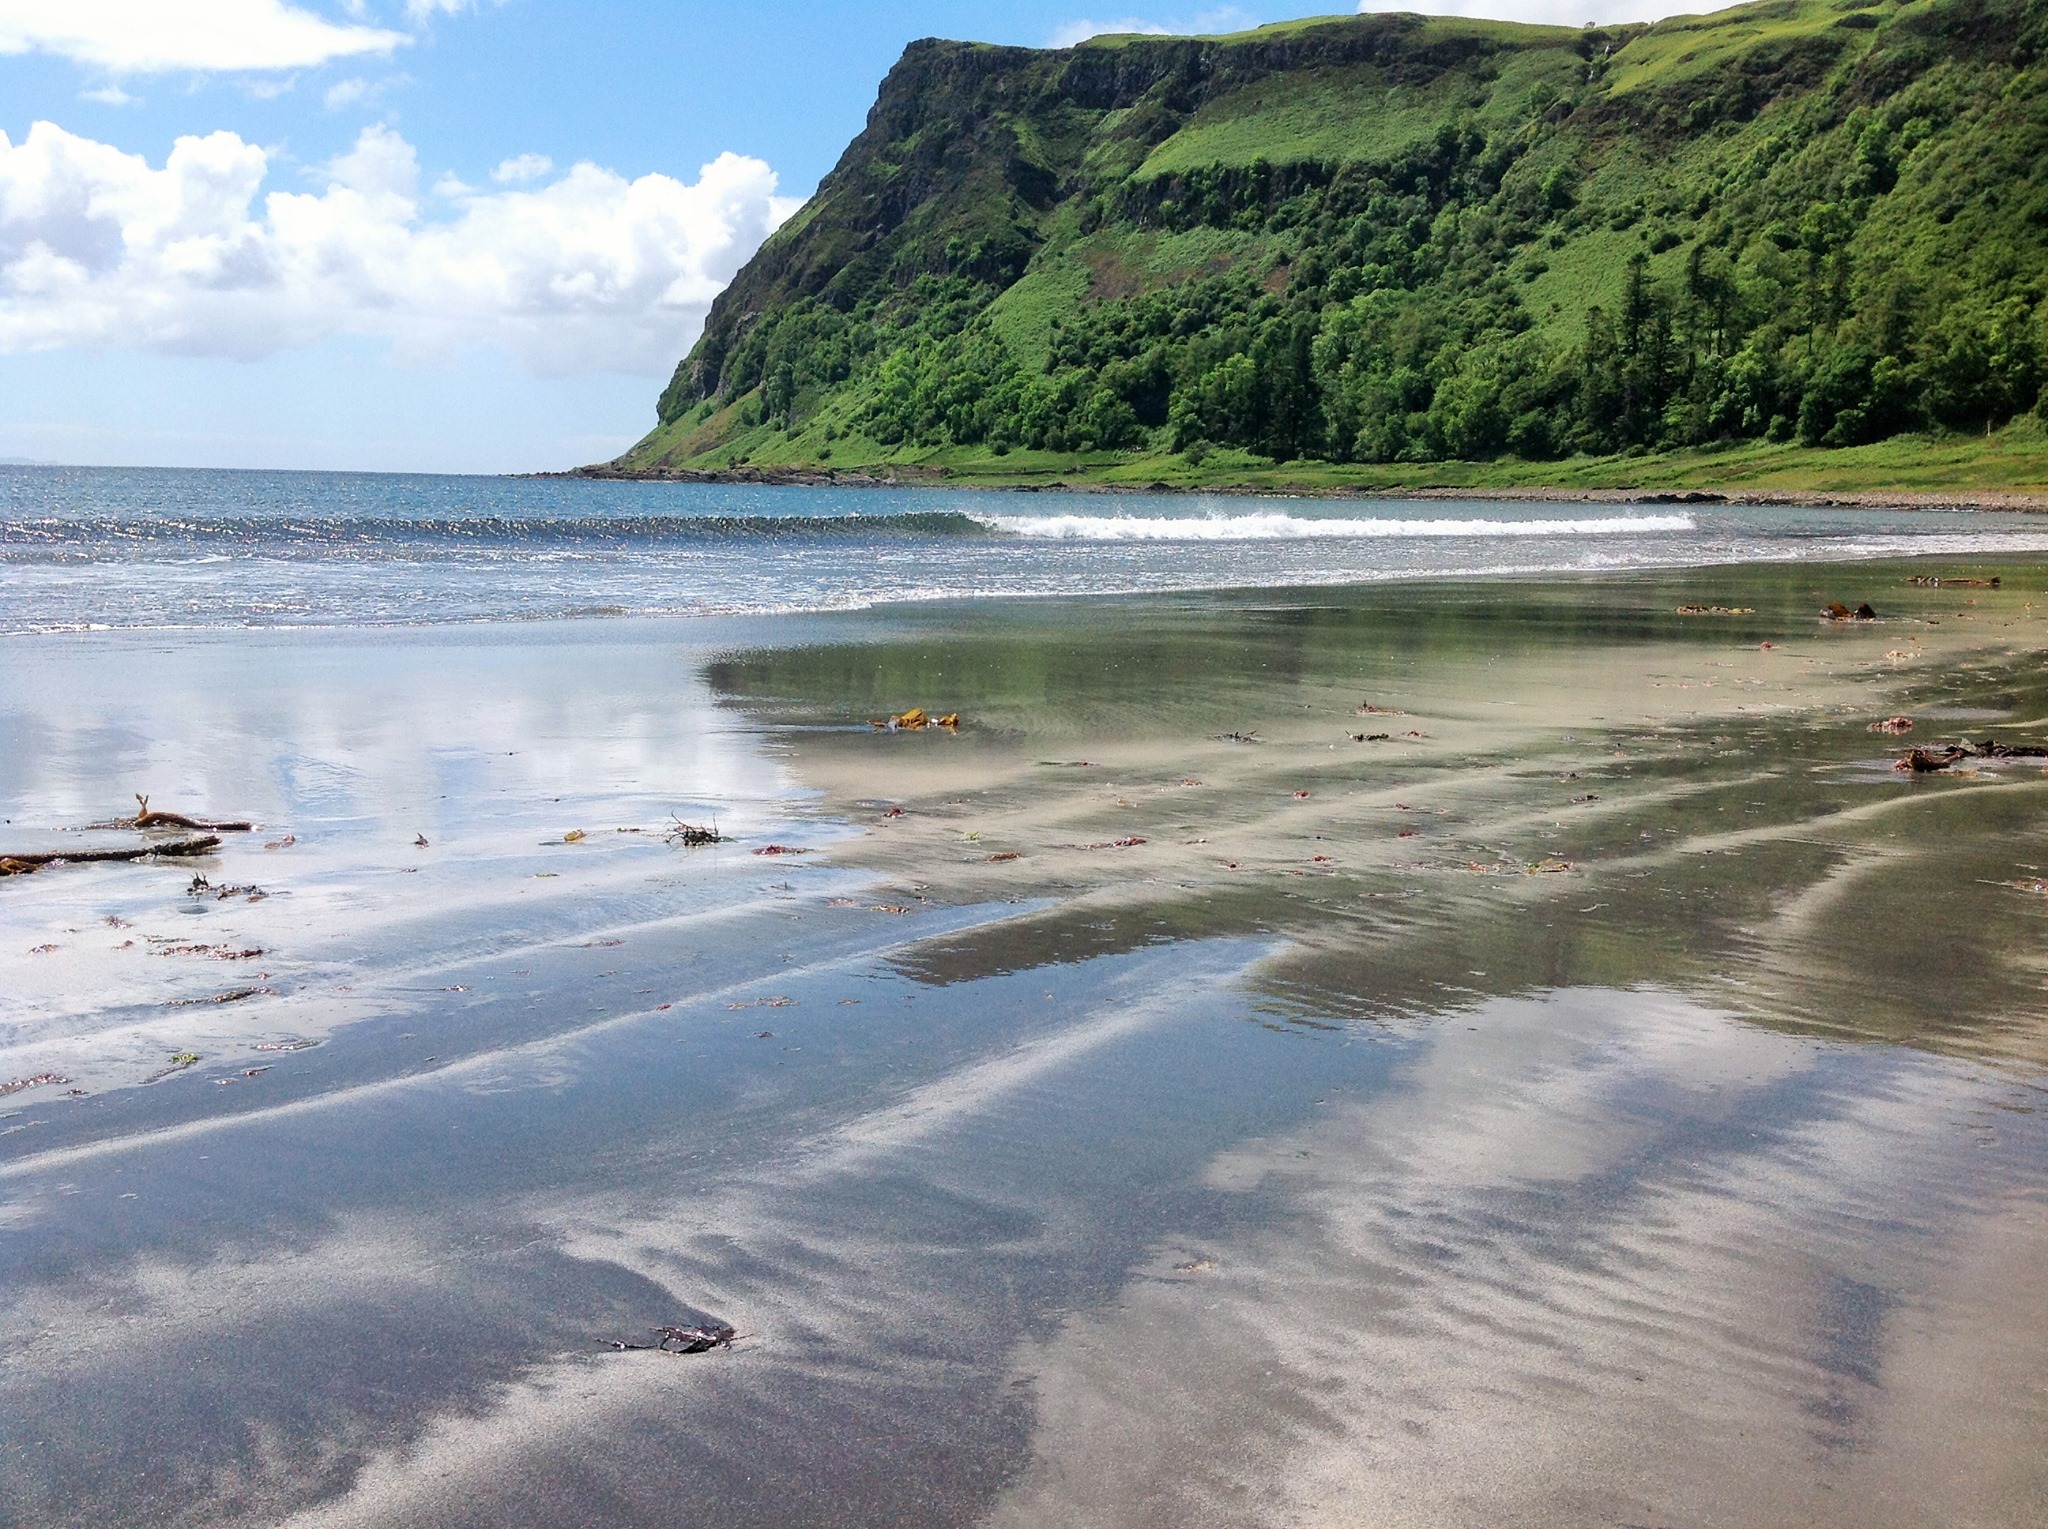 The grey sand beach at Carsaig, surrounded by a lush green headland and blue clouded skies as the waves lap on shore